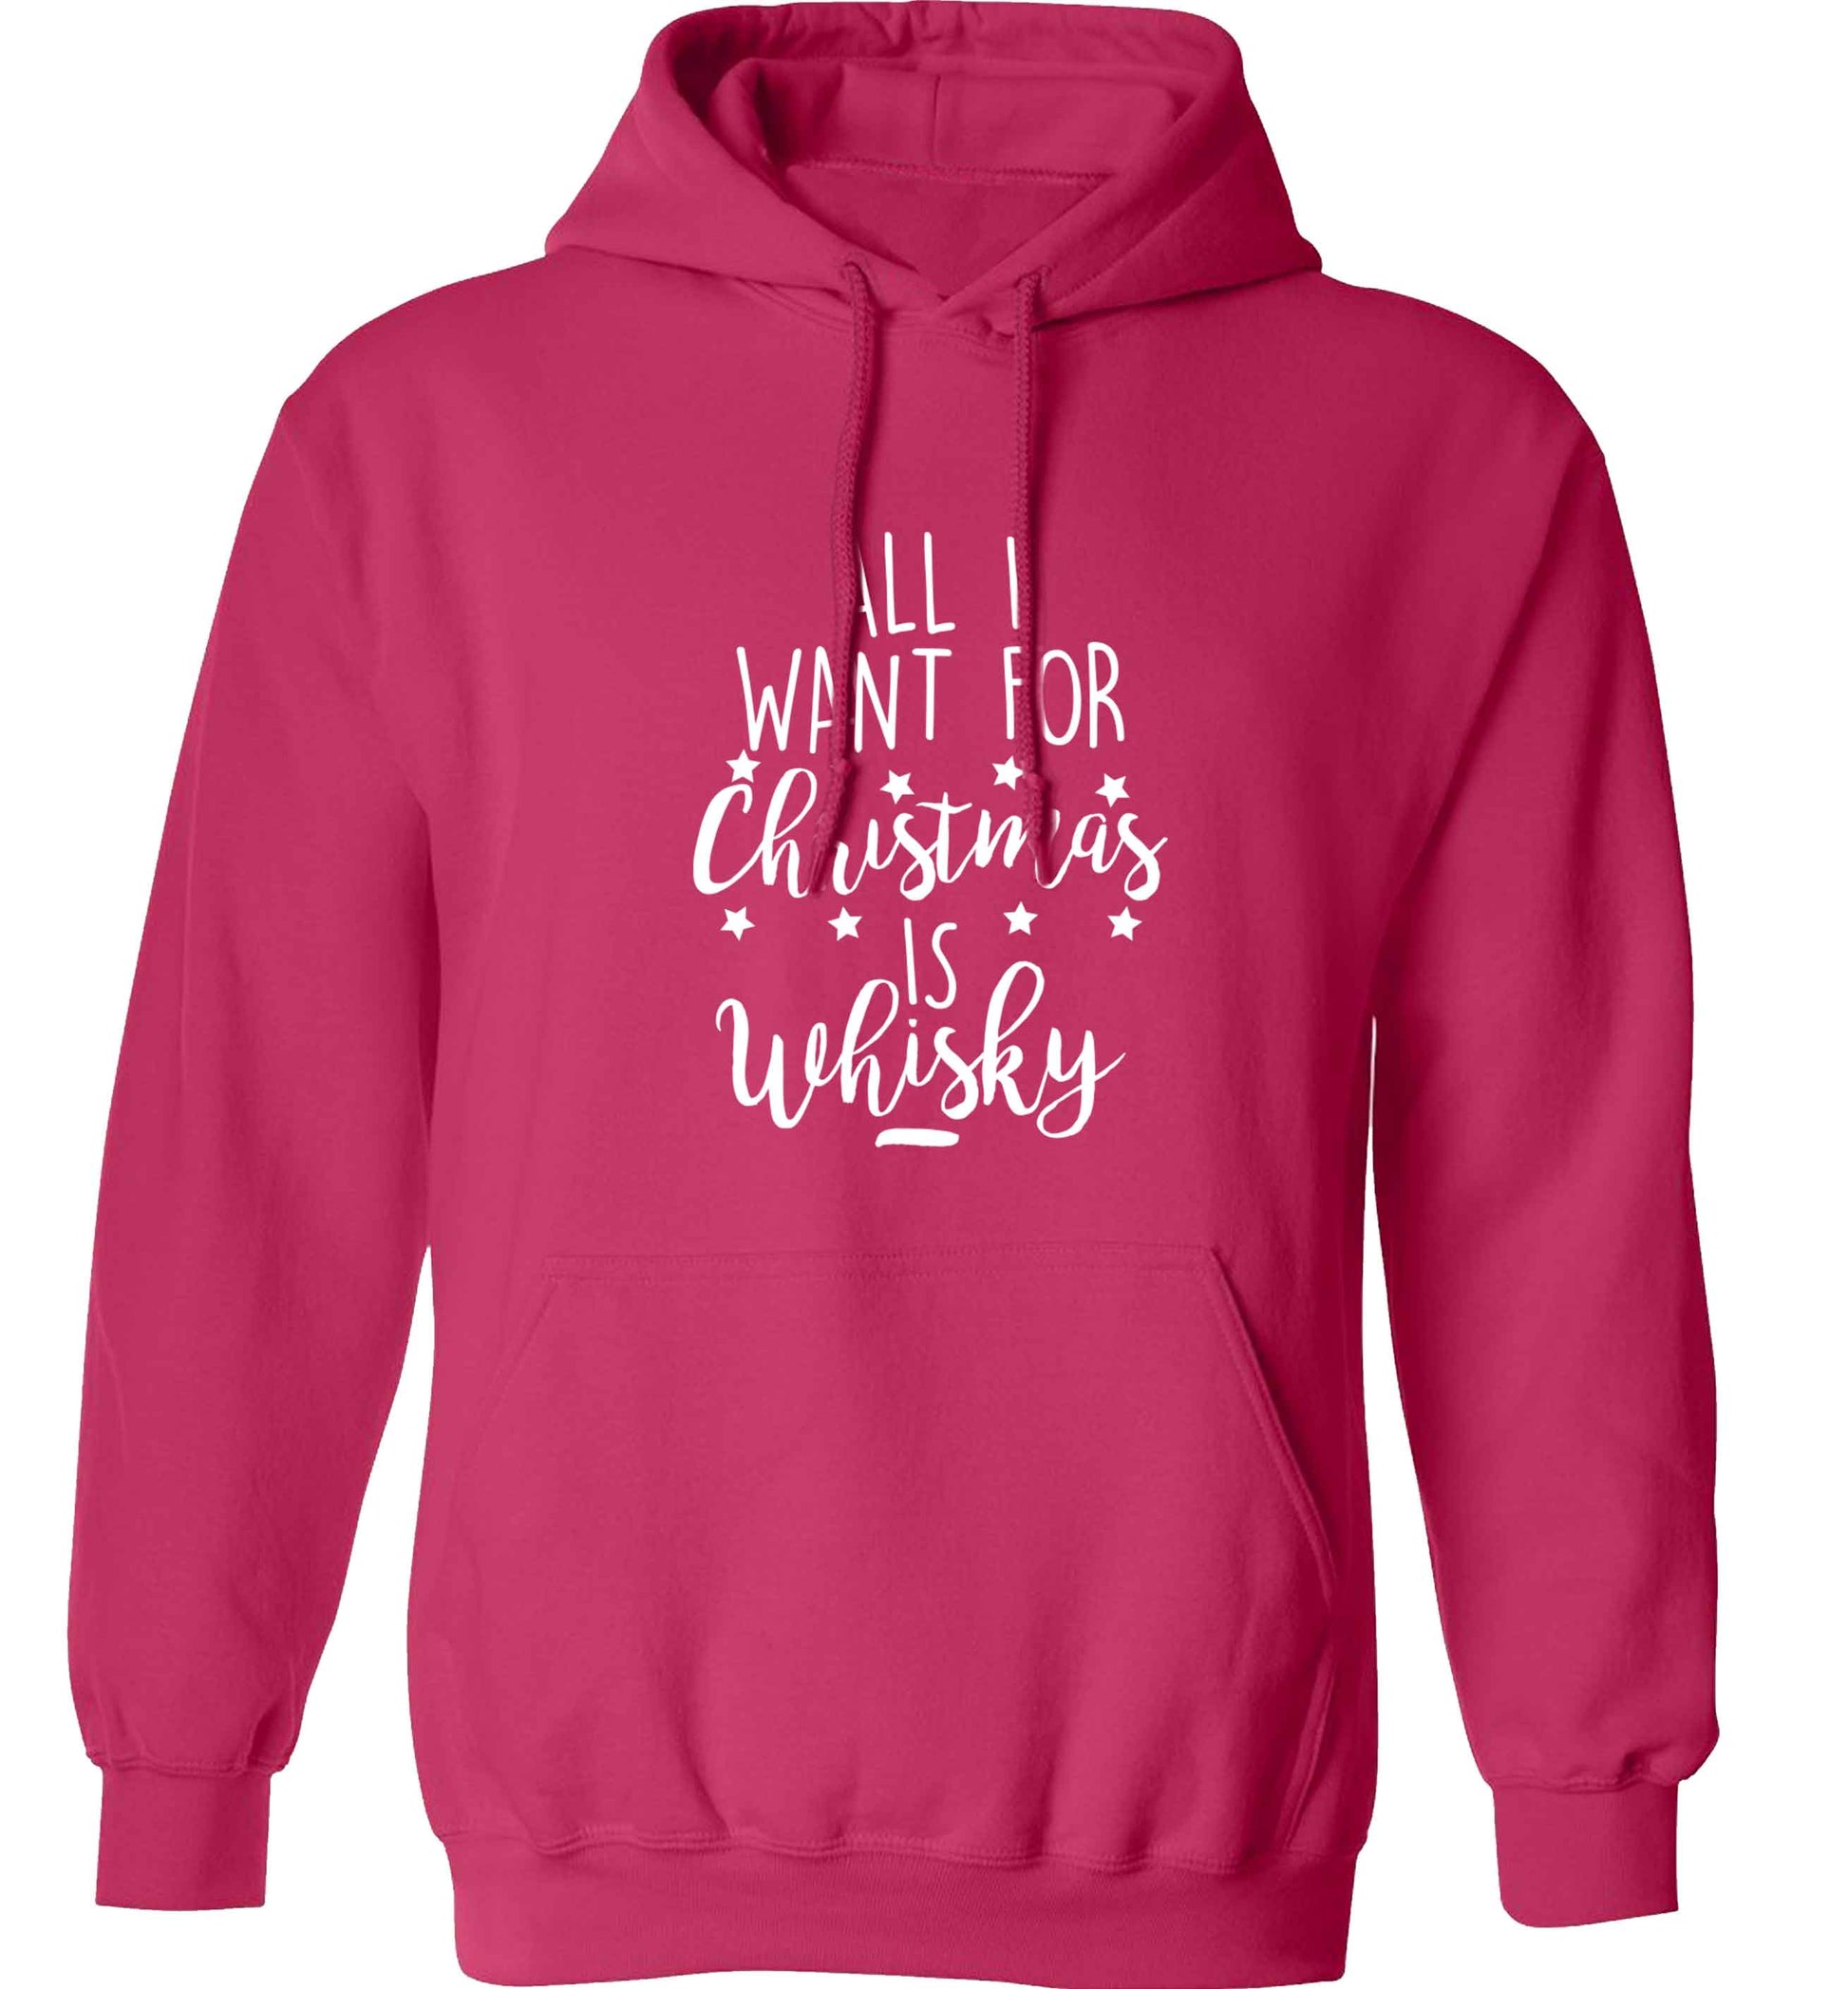 All I want for Christmas is whisky adults unisex pink hoodie 2XL